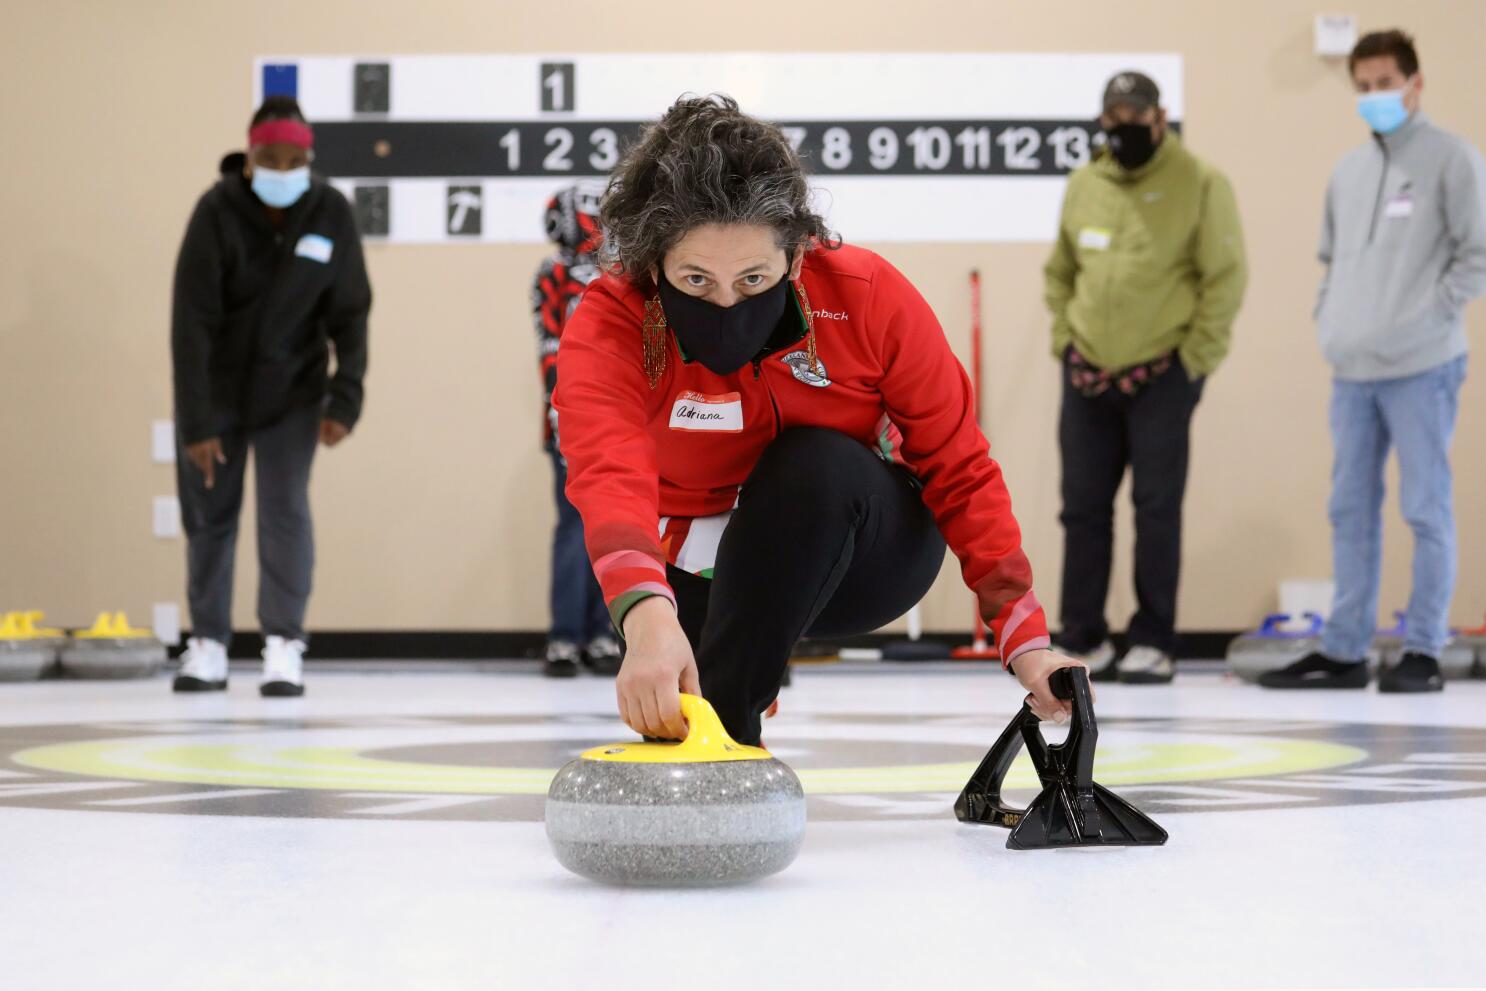 Latinx curlers find a home on ice, push for Olympic bids - Los Angeles Times